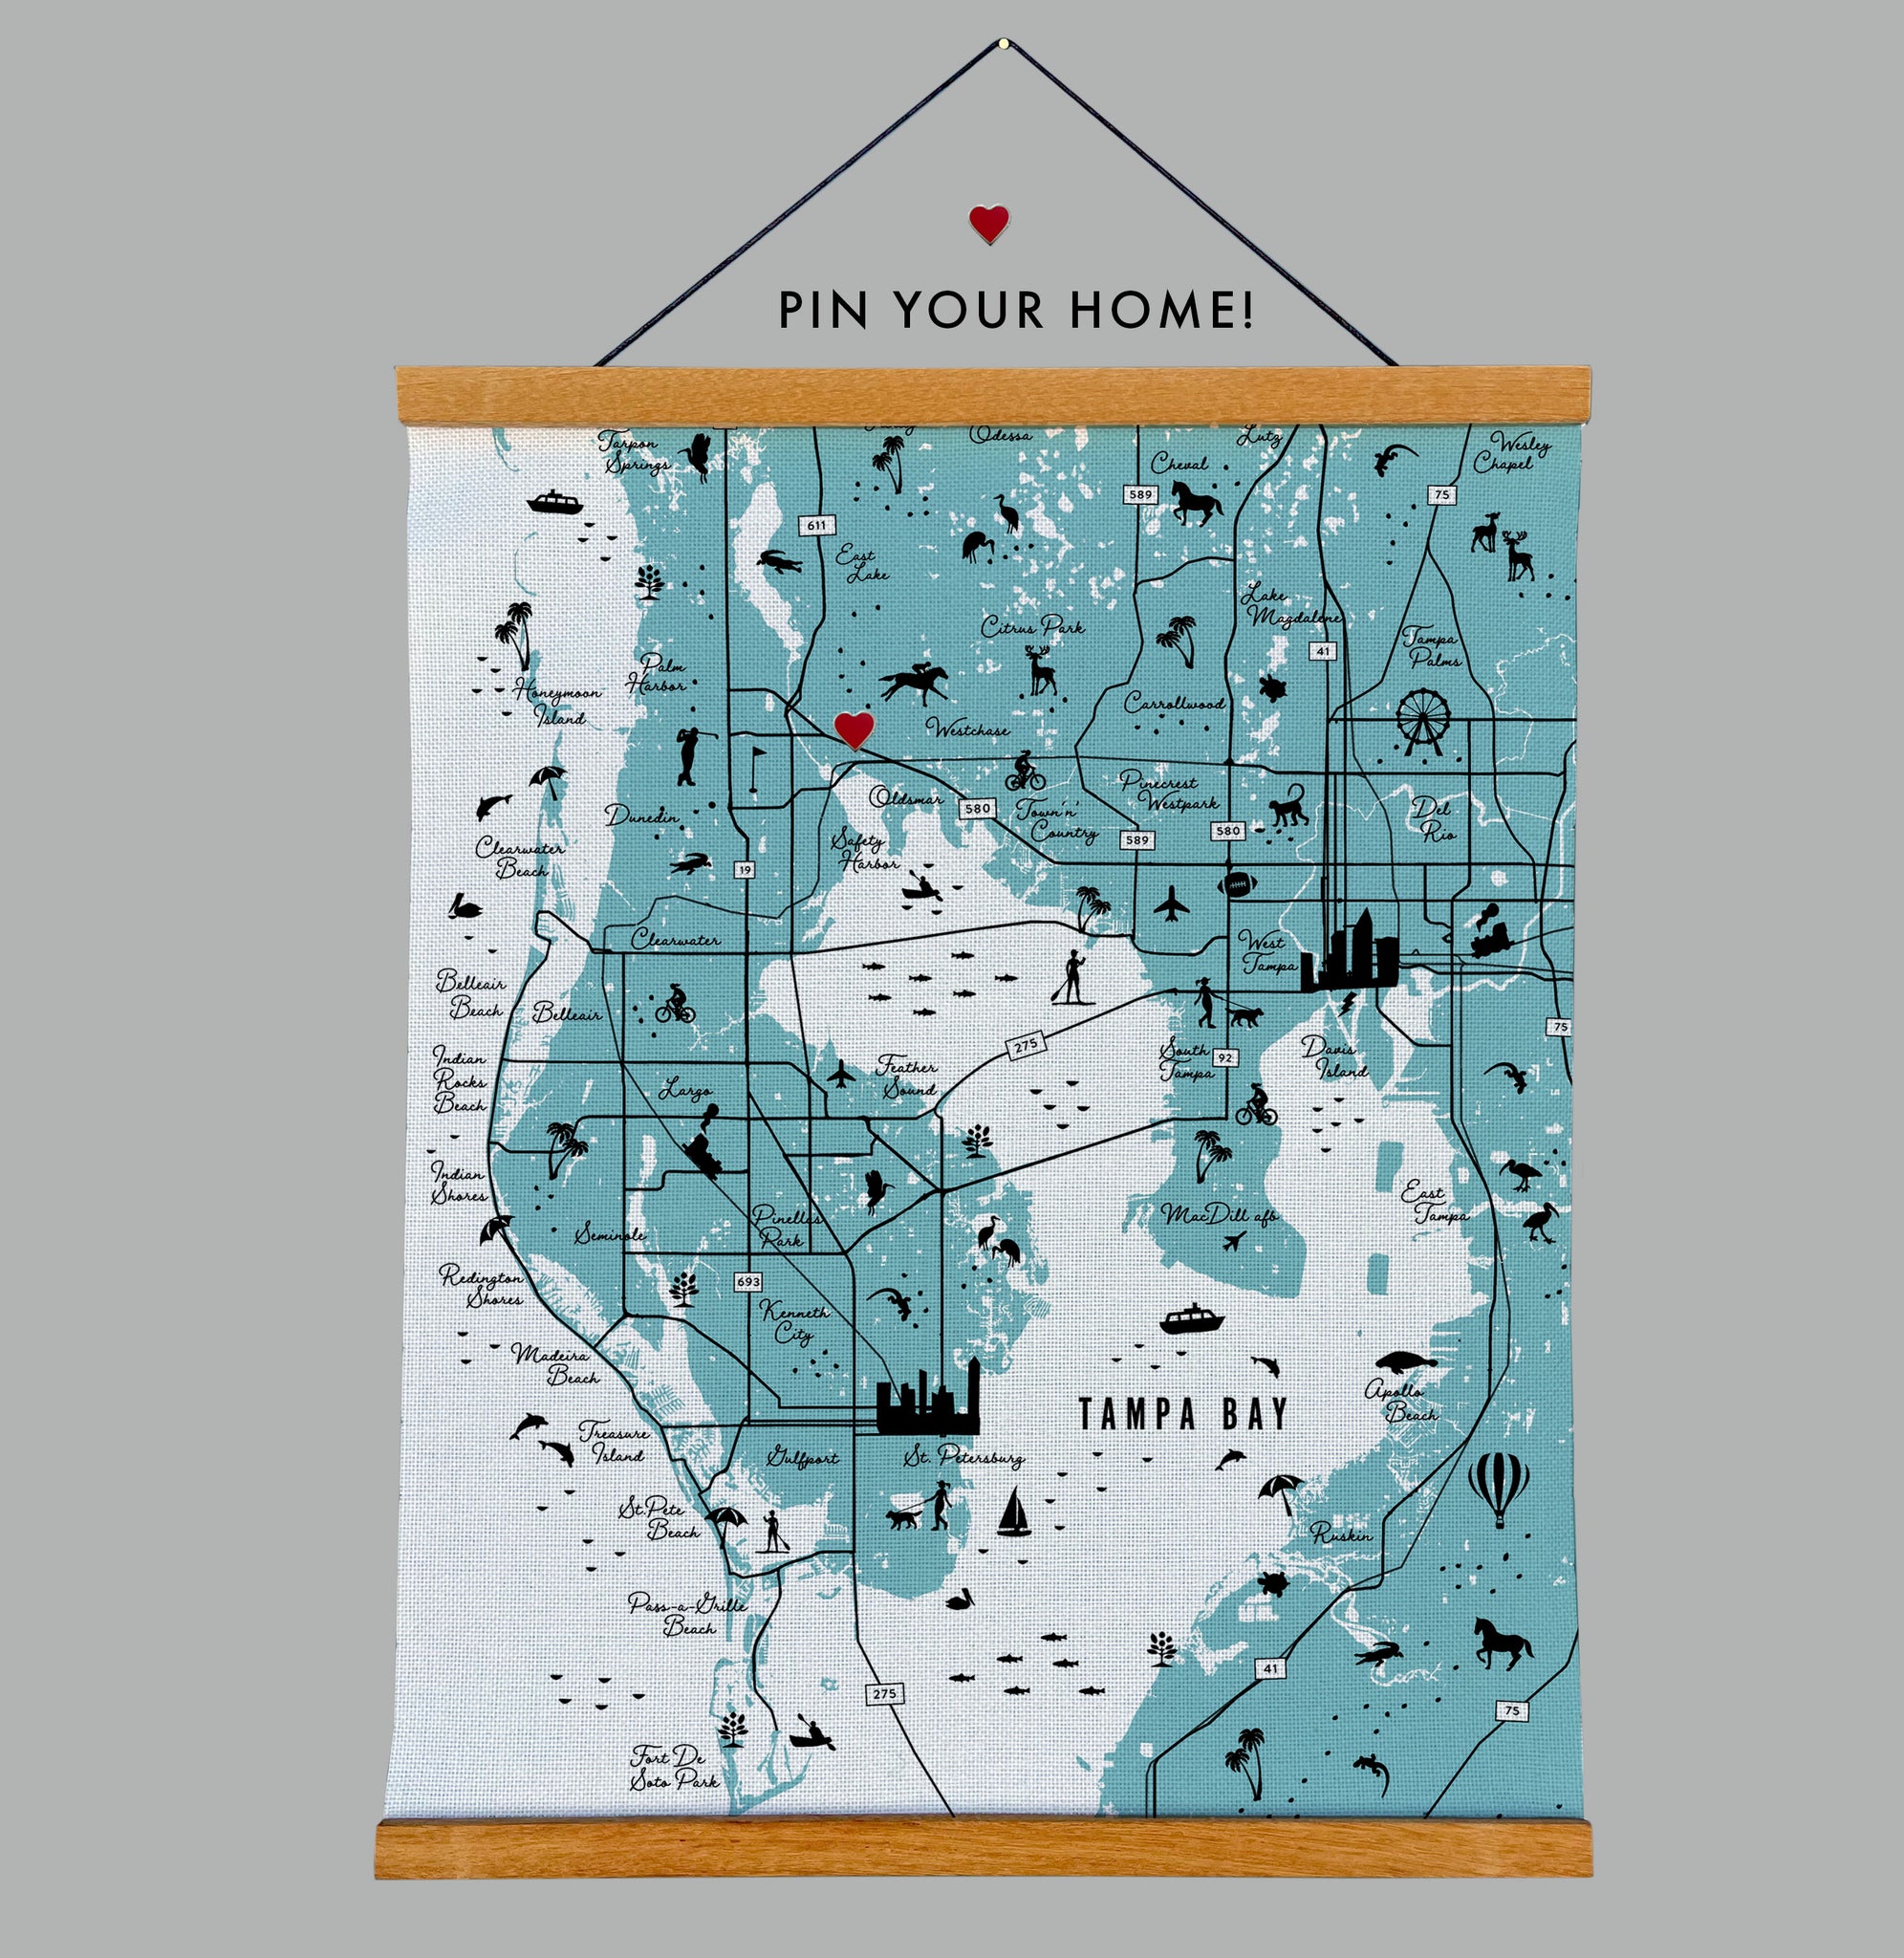 Tampa Bay Florida Illustrated Icon Map Fabric Print with Wooden Hanging Frame | Tampa Wall Hanging Tapestry Scroll PIN YOUR HOME